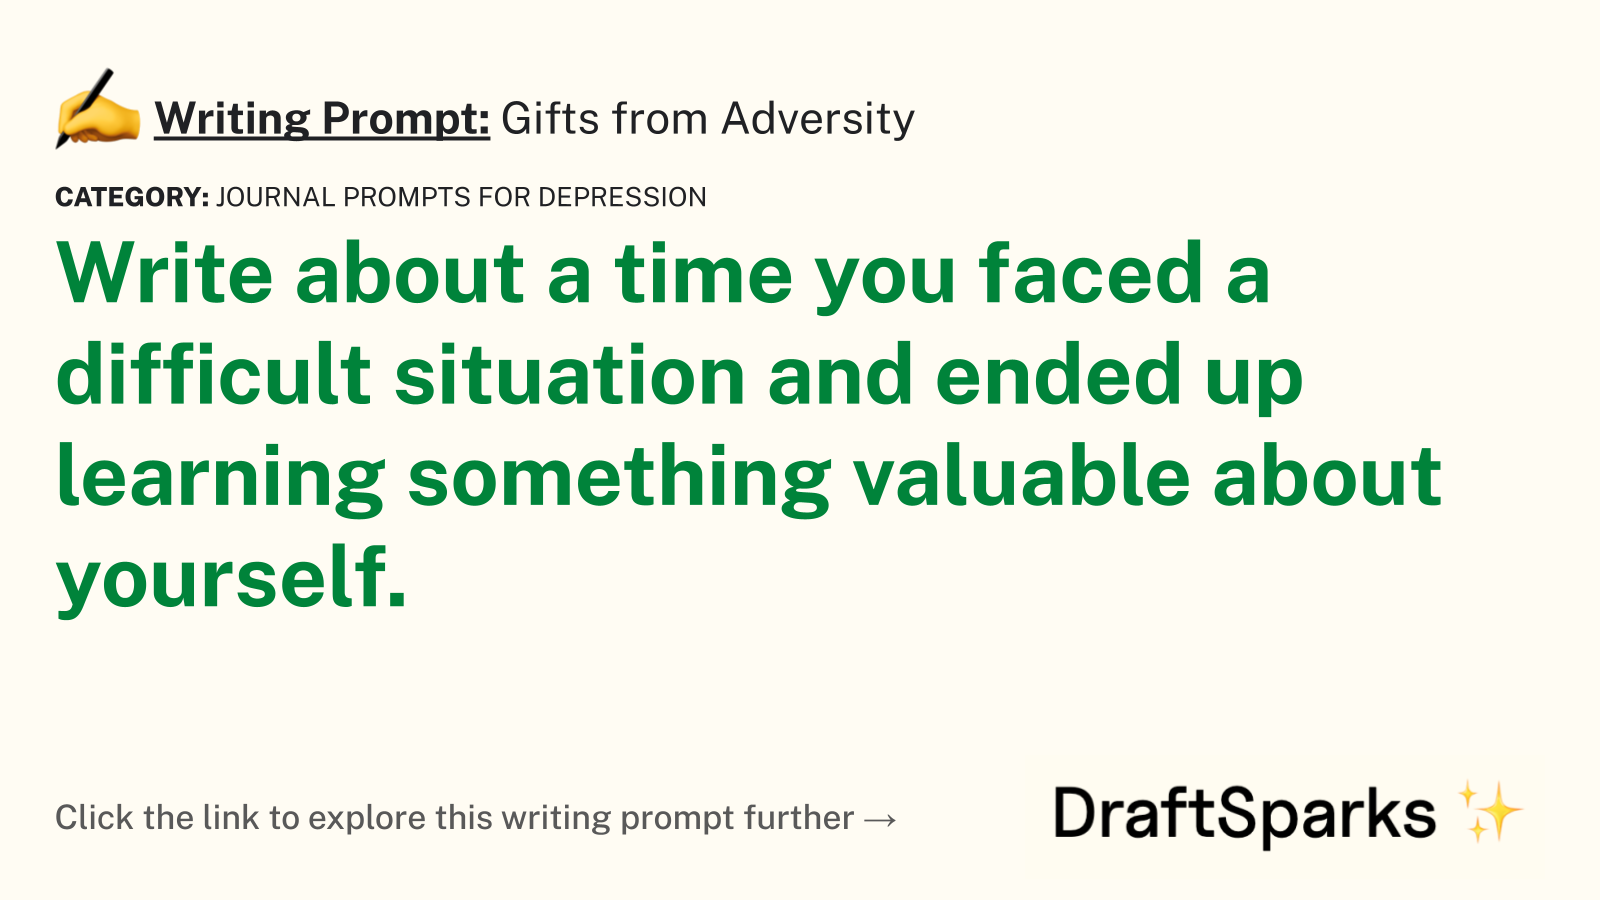 Gifts from Adversity